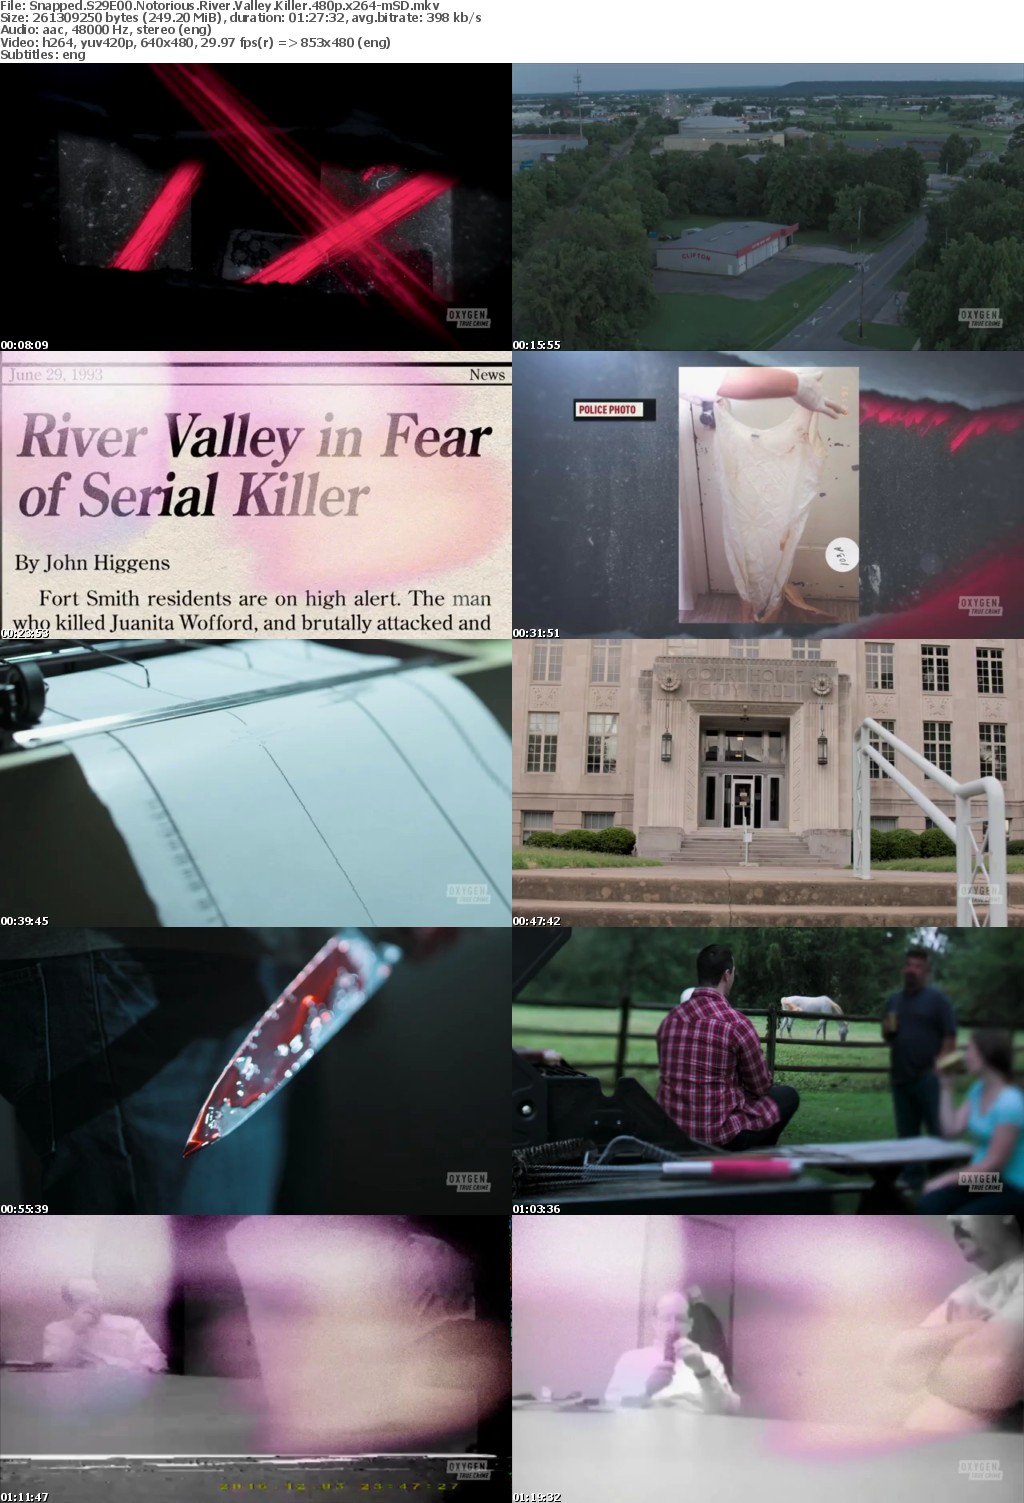 Snapped S29E00 Notorious River Valley Killer 480p x264-mSD